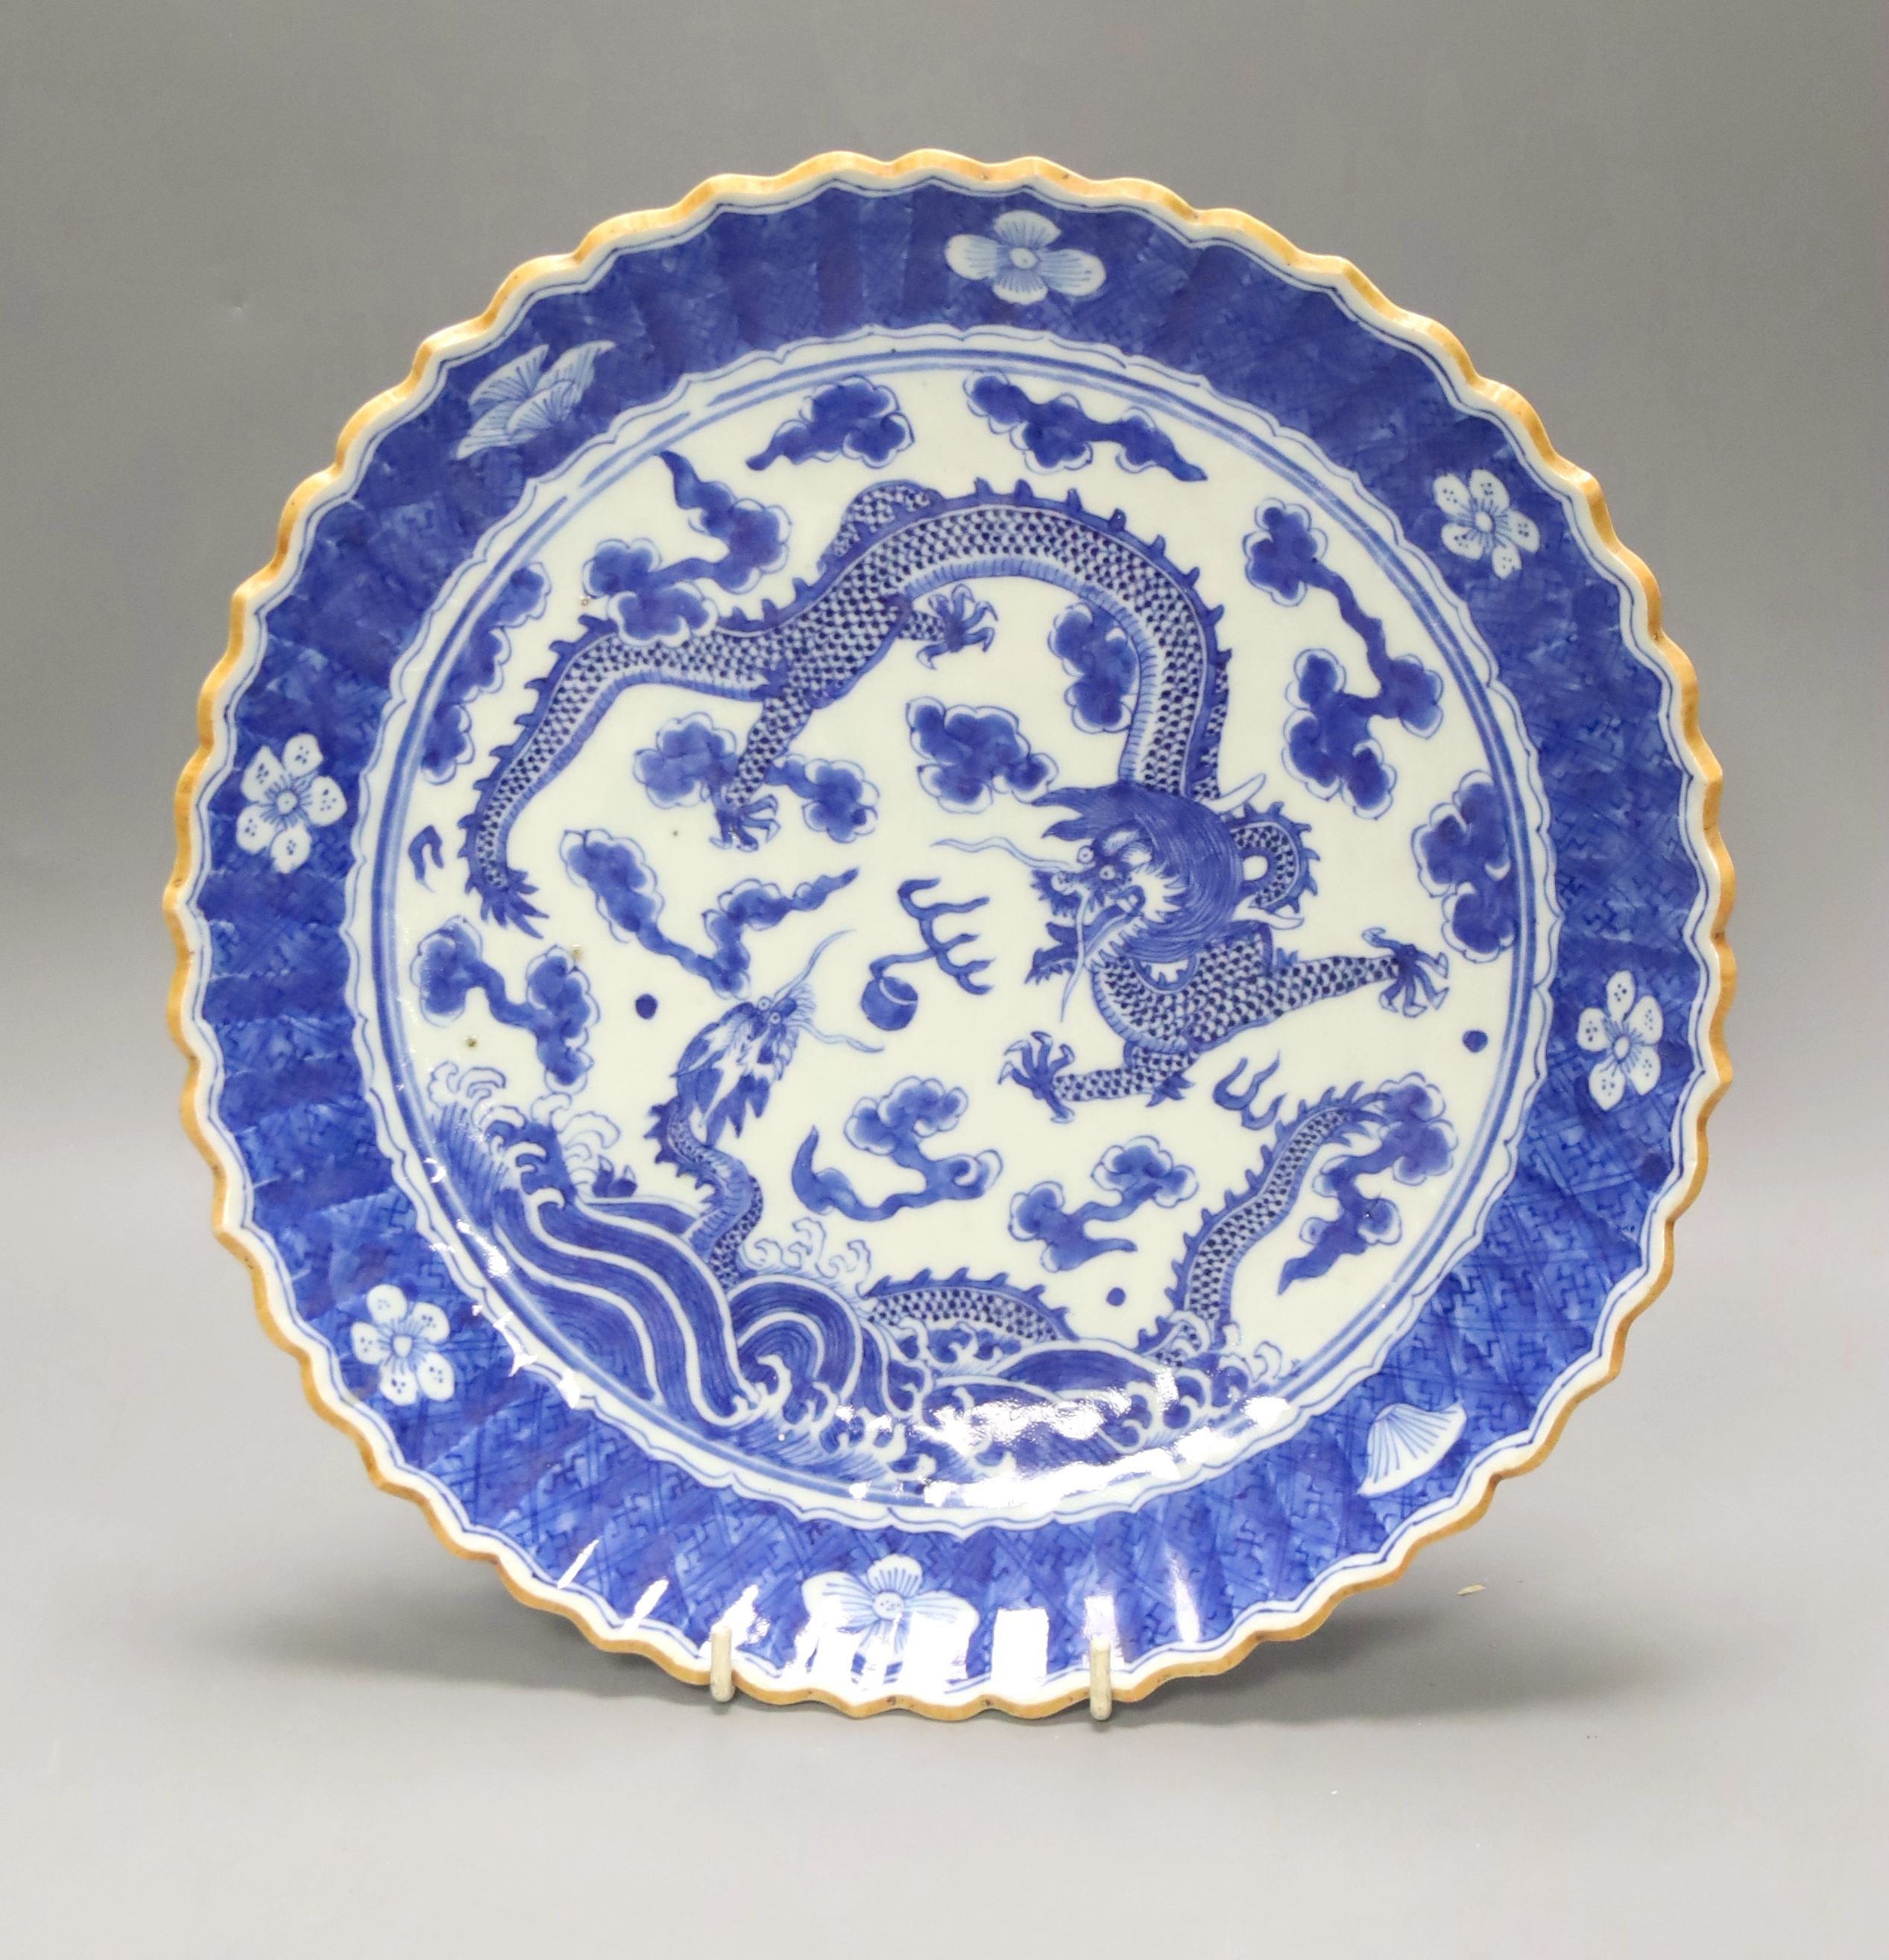 A Chinese blue and white dragon dish, 19th century with a Chenghua mark, 29cm